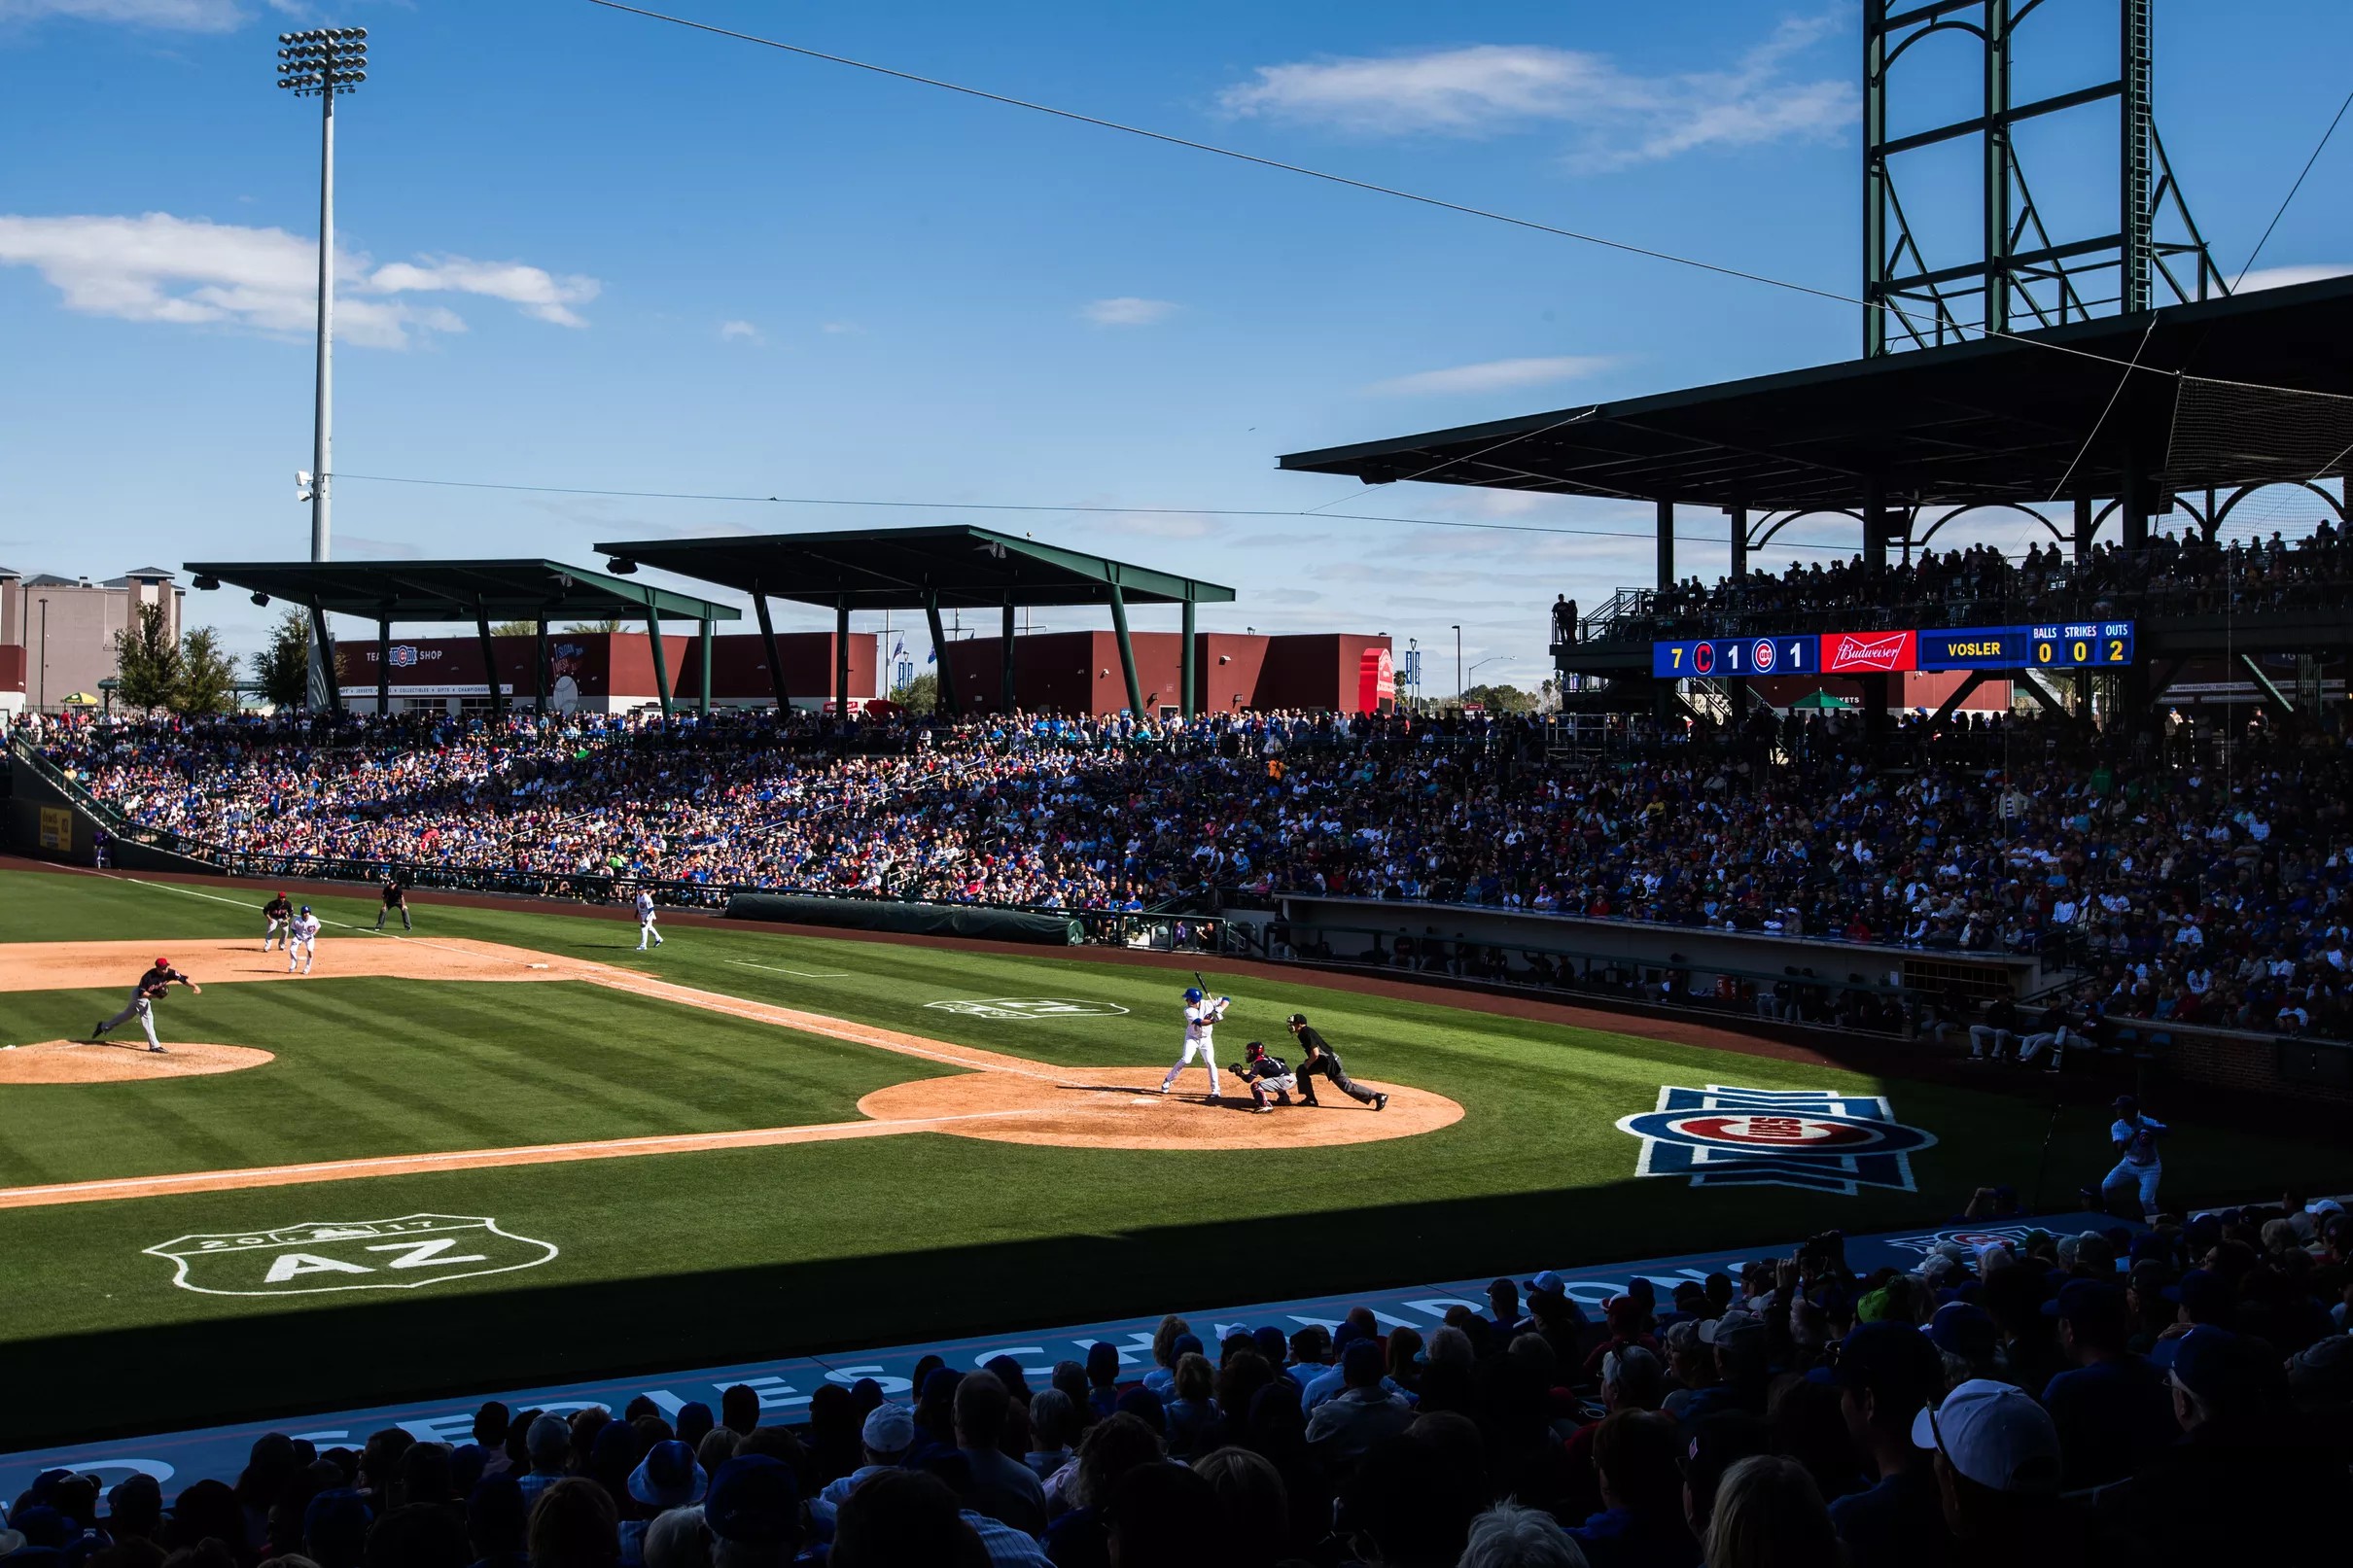 Cubs spring training tickets go on sale Saturday